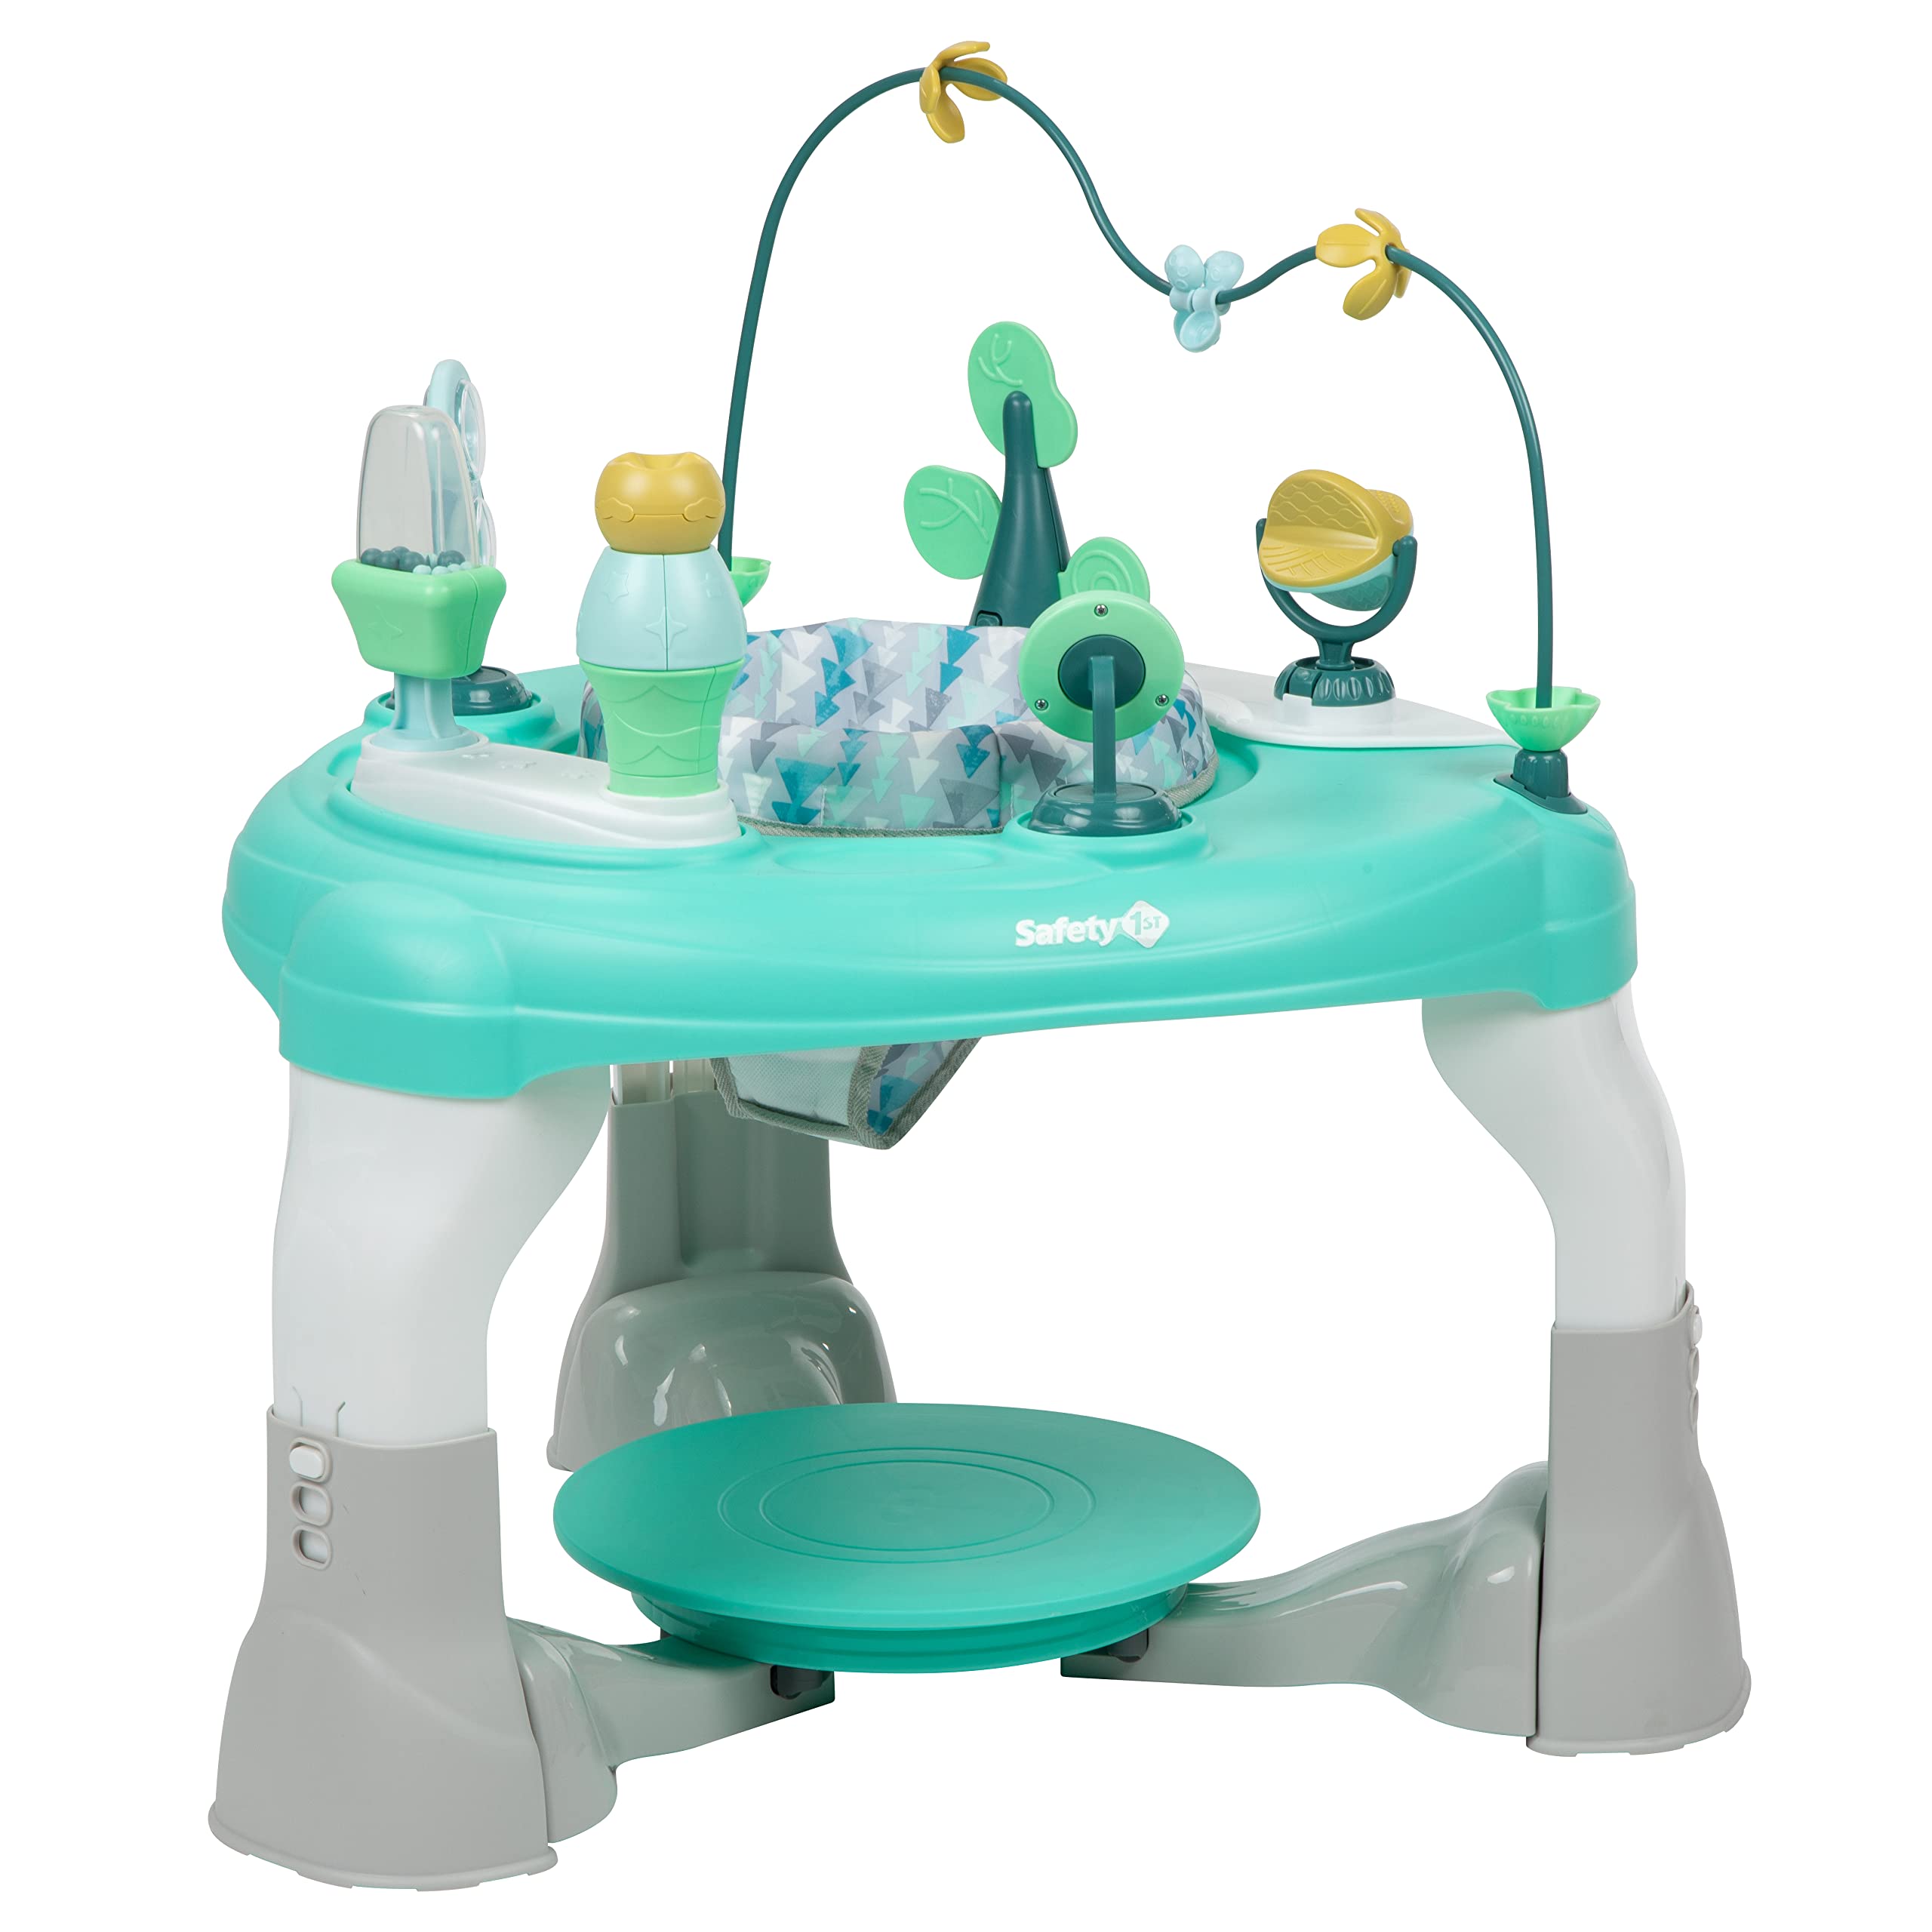 Safety 1st Grow and Go 4-in-1 Stationary Activity Center, Oslo